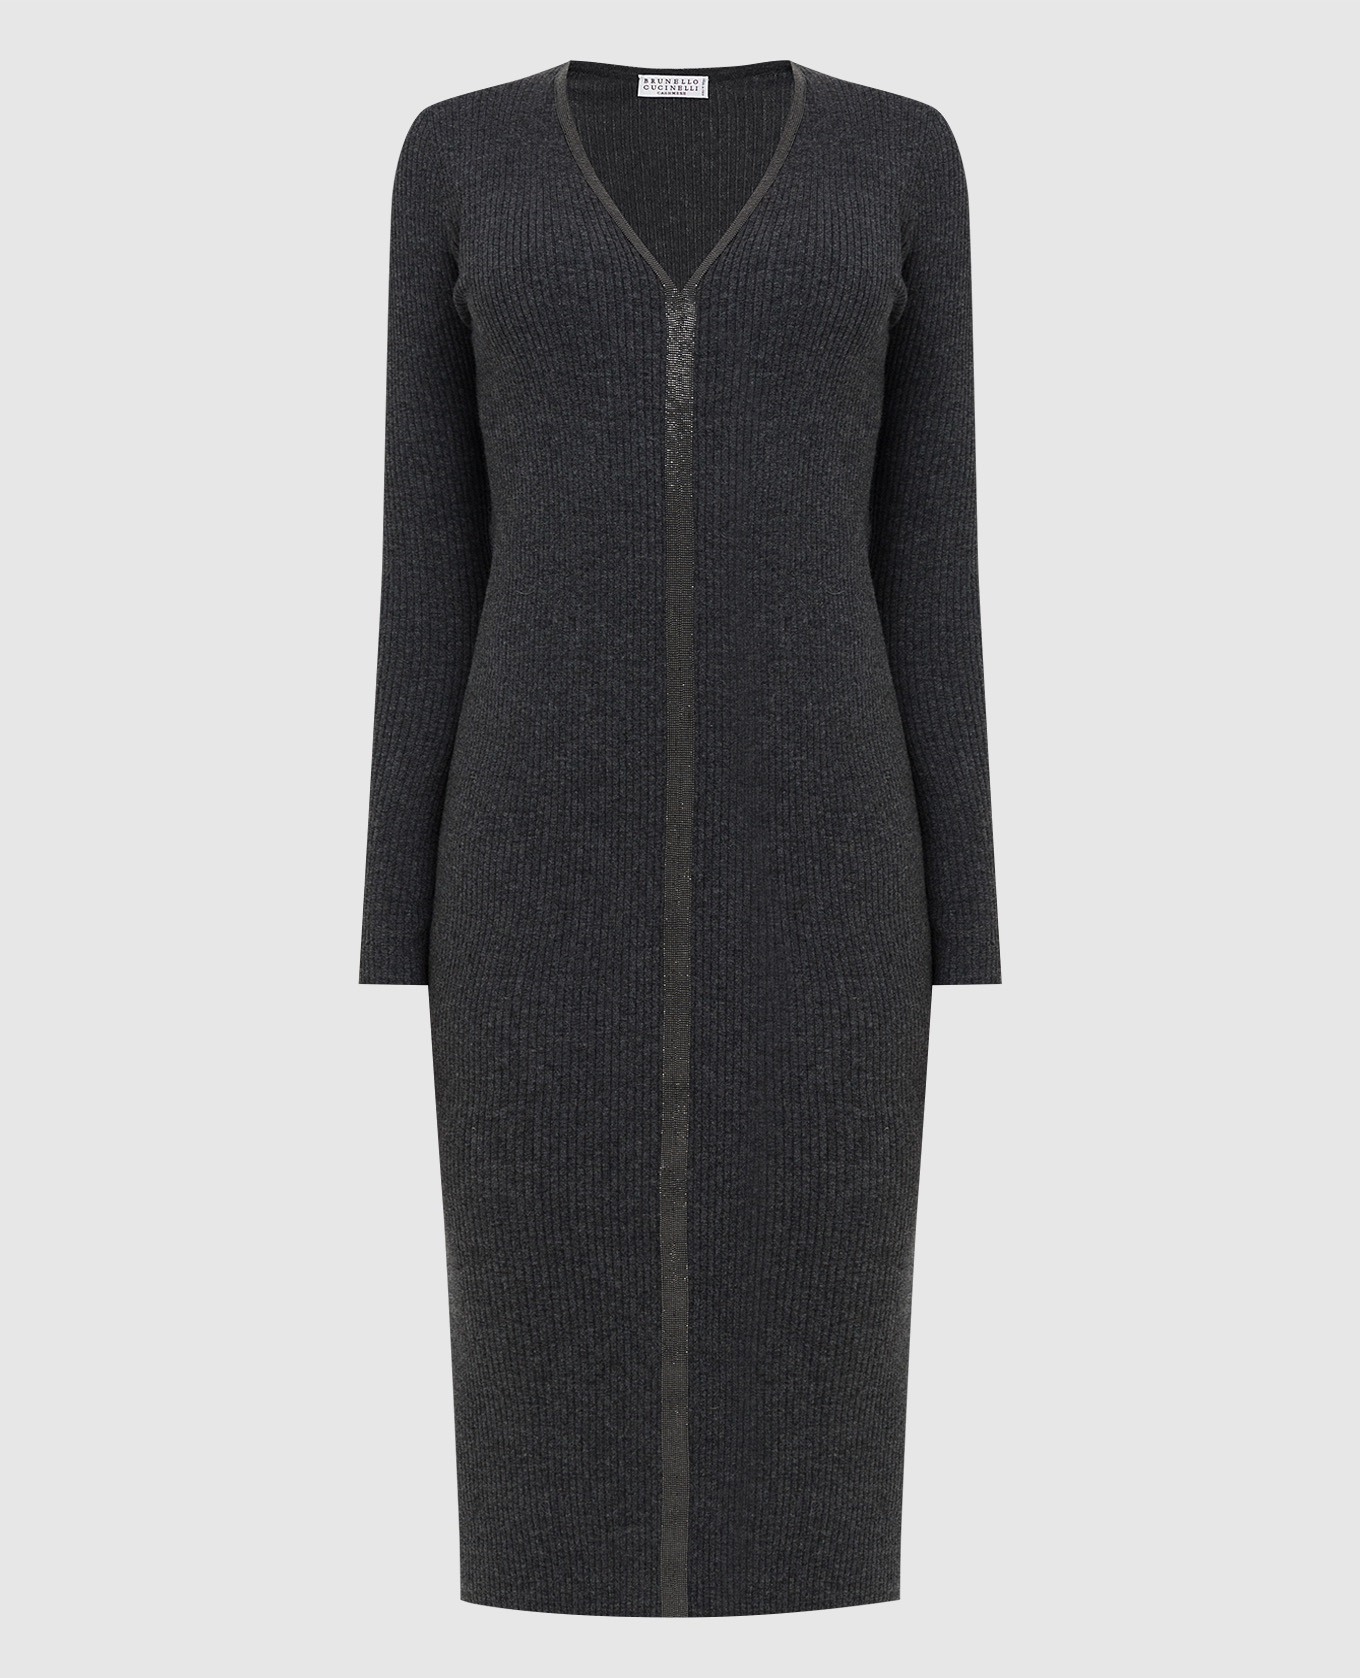 Graphite cashmere dress with chains